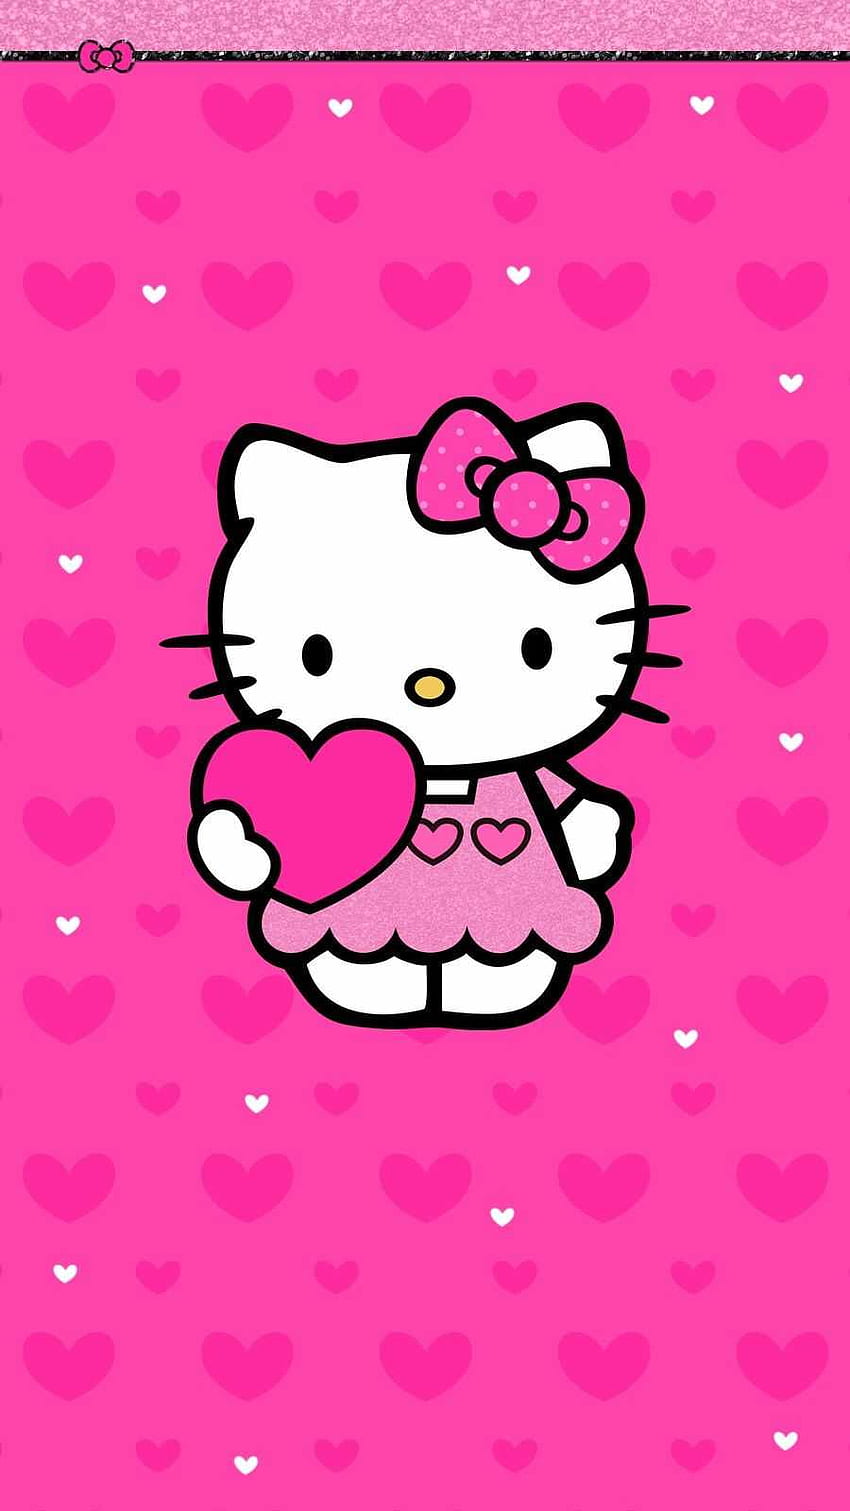 Hello Kitty Wallpapers 2018 51 pictures